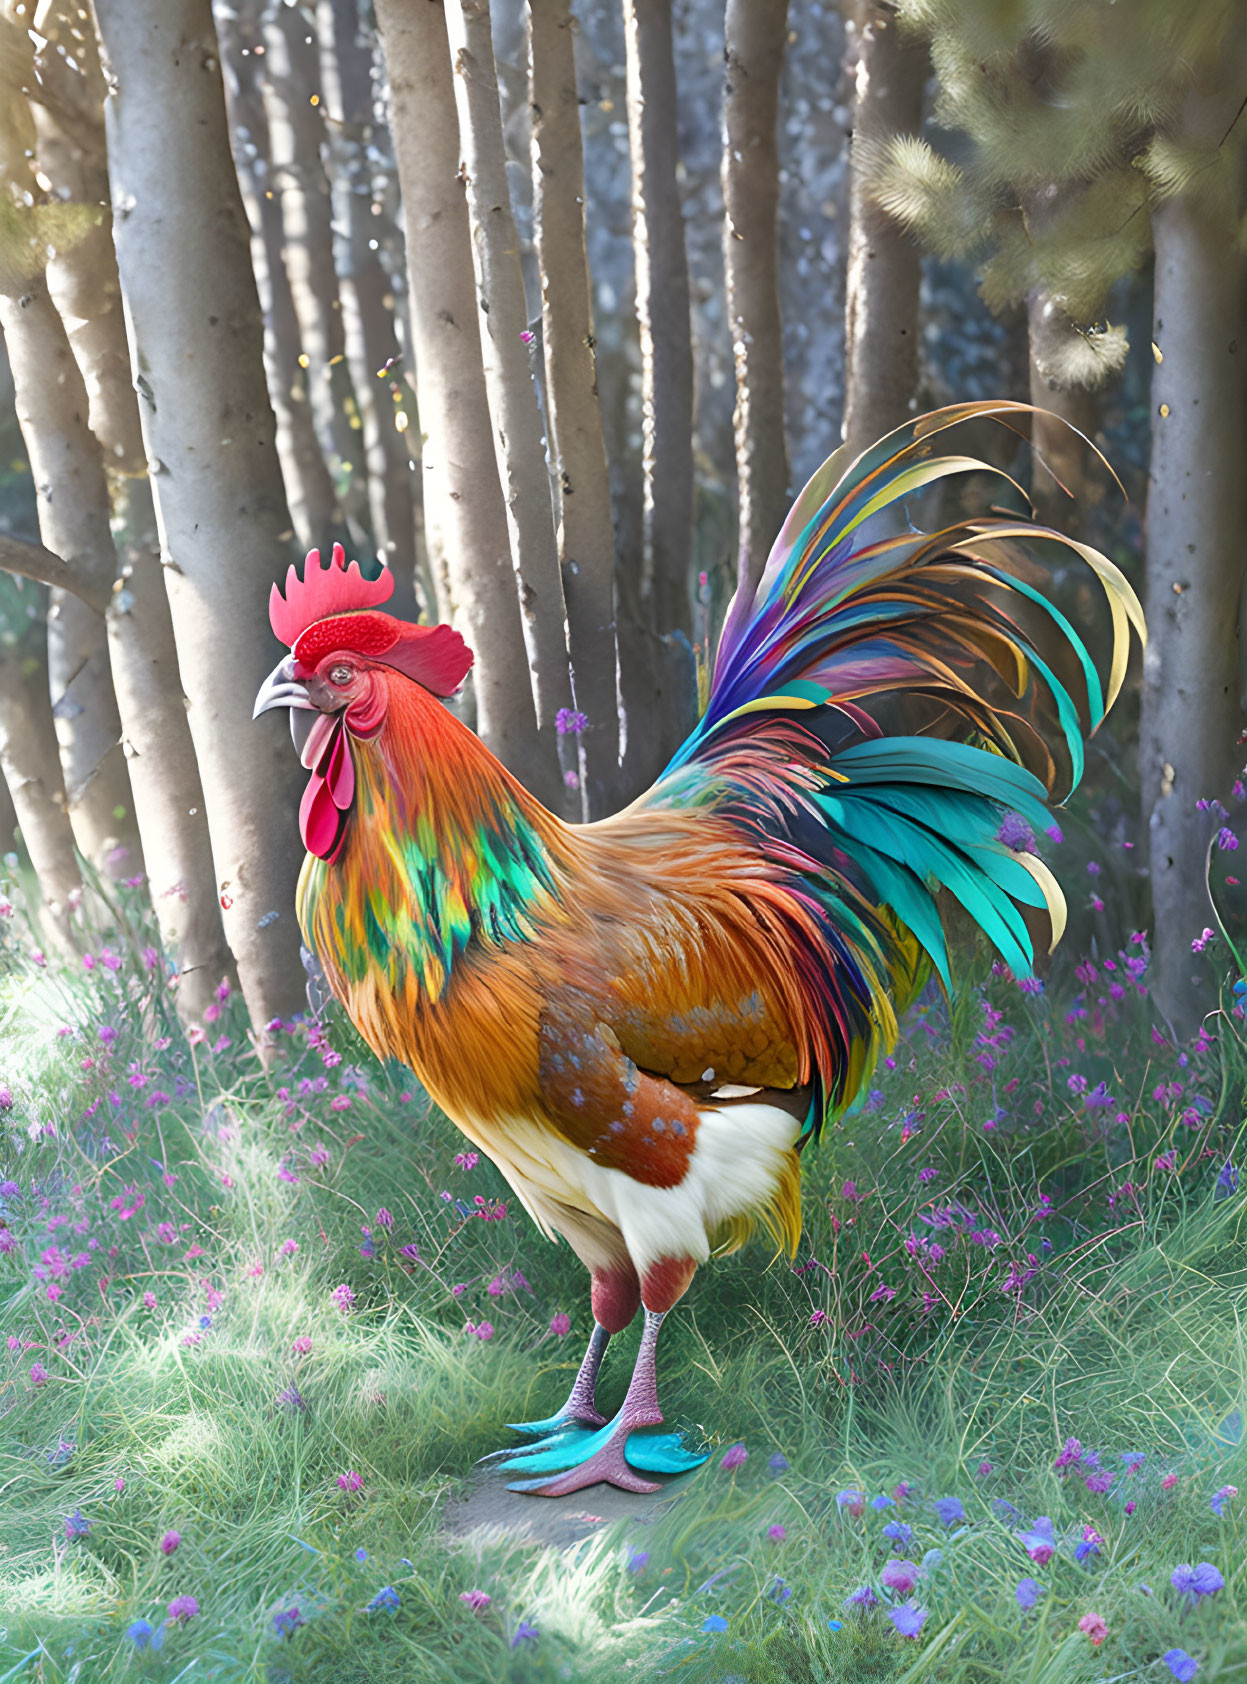 Colorful rooster surrounded by flowers and trees in sunlight